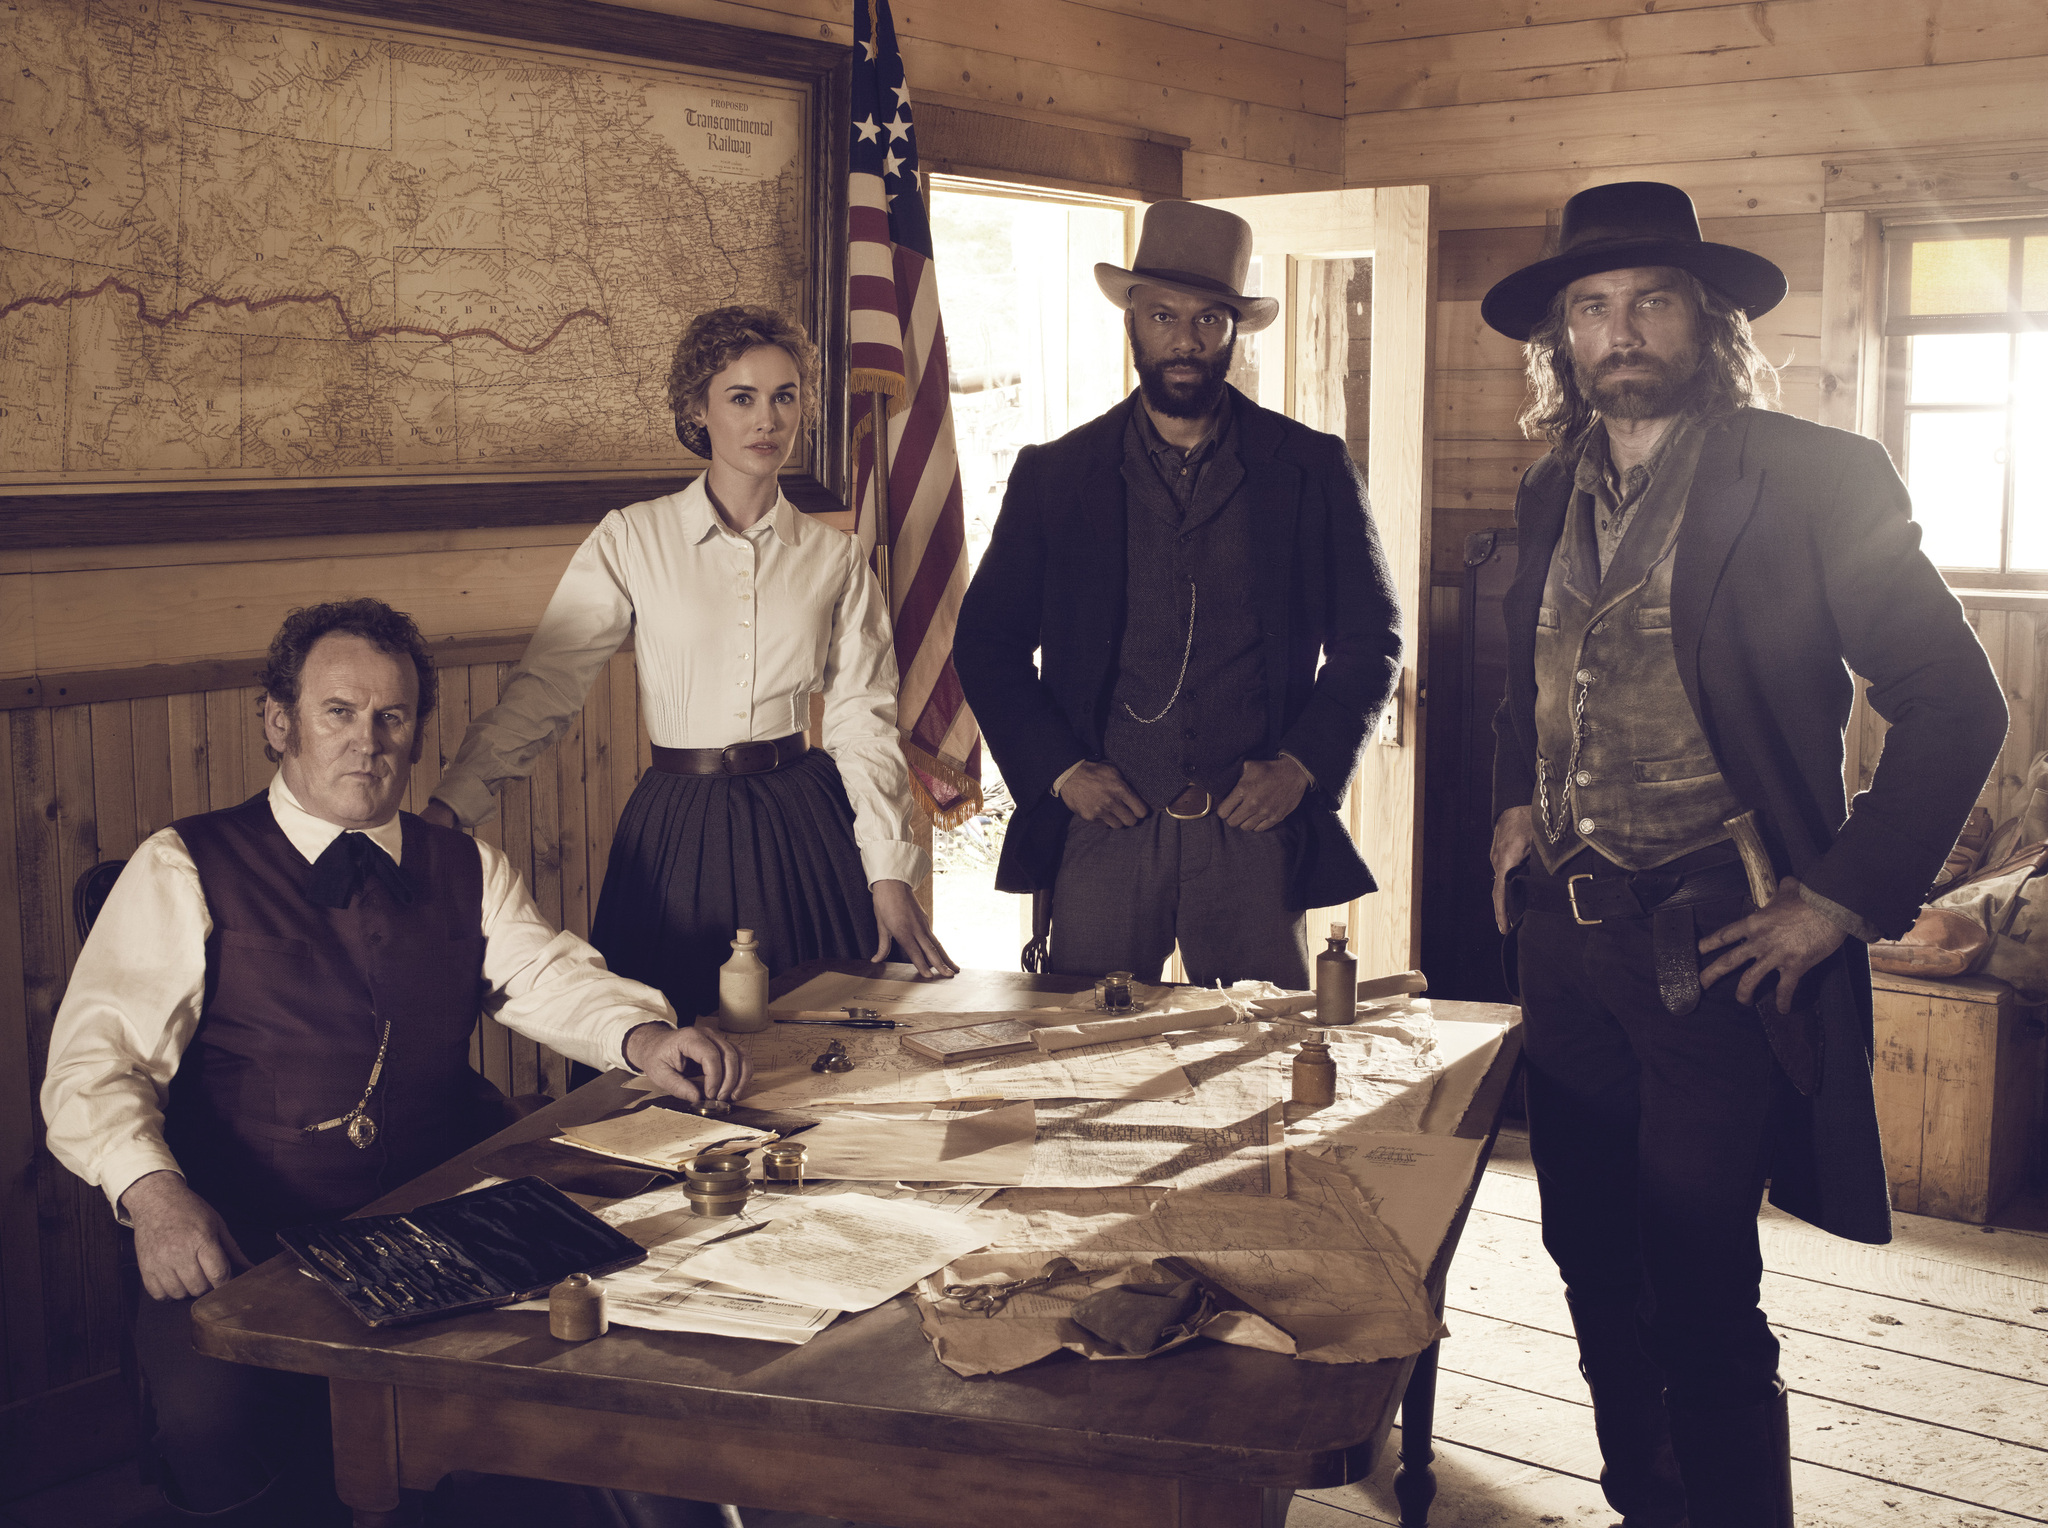 Colm Meaney, Anson Mount, Common and Dominique McElligott in Hell on Wheels (2011)